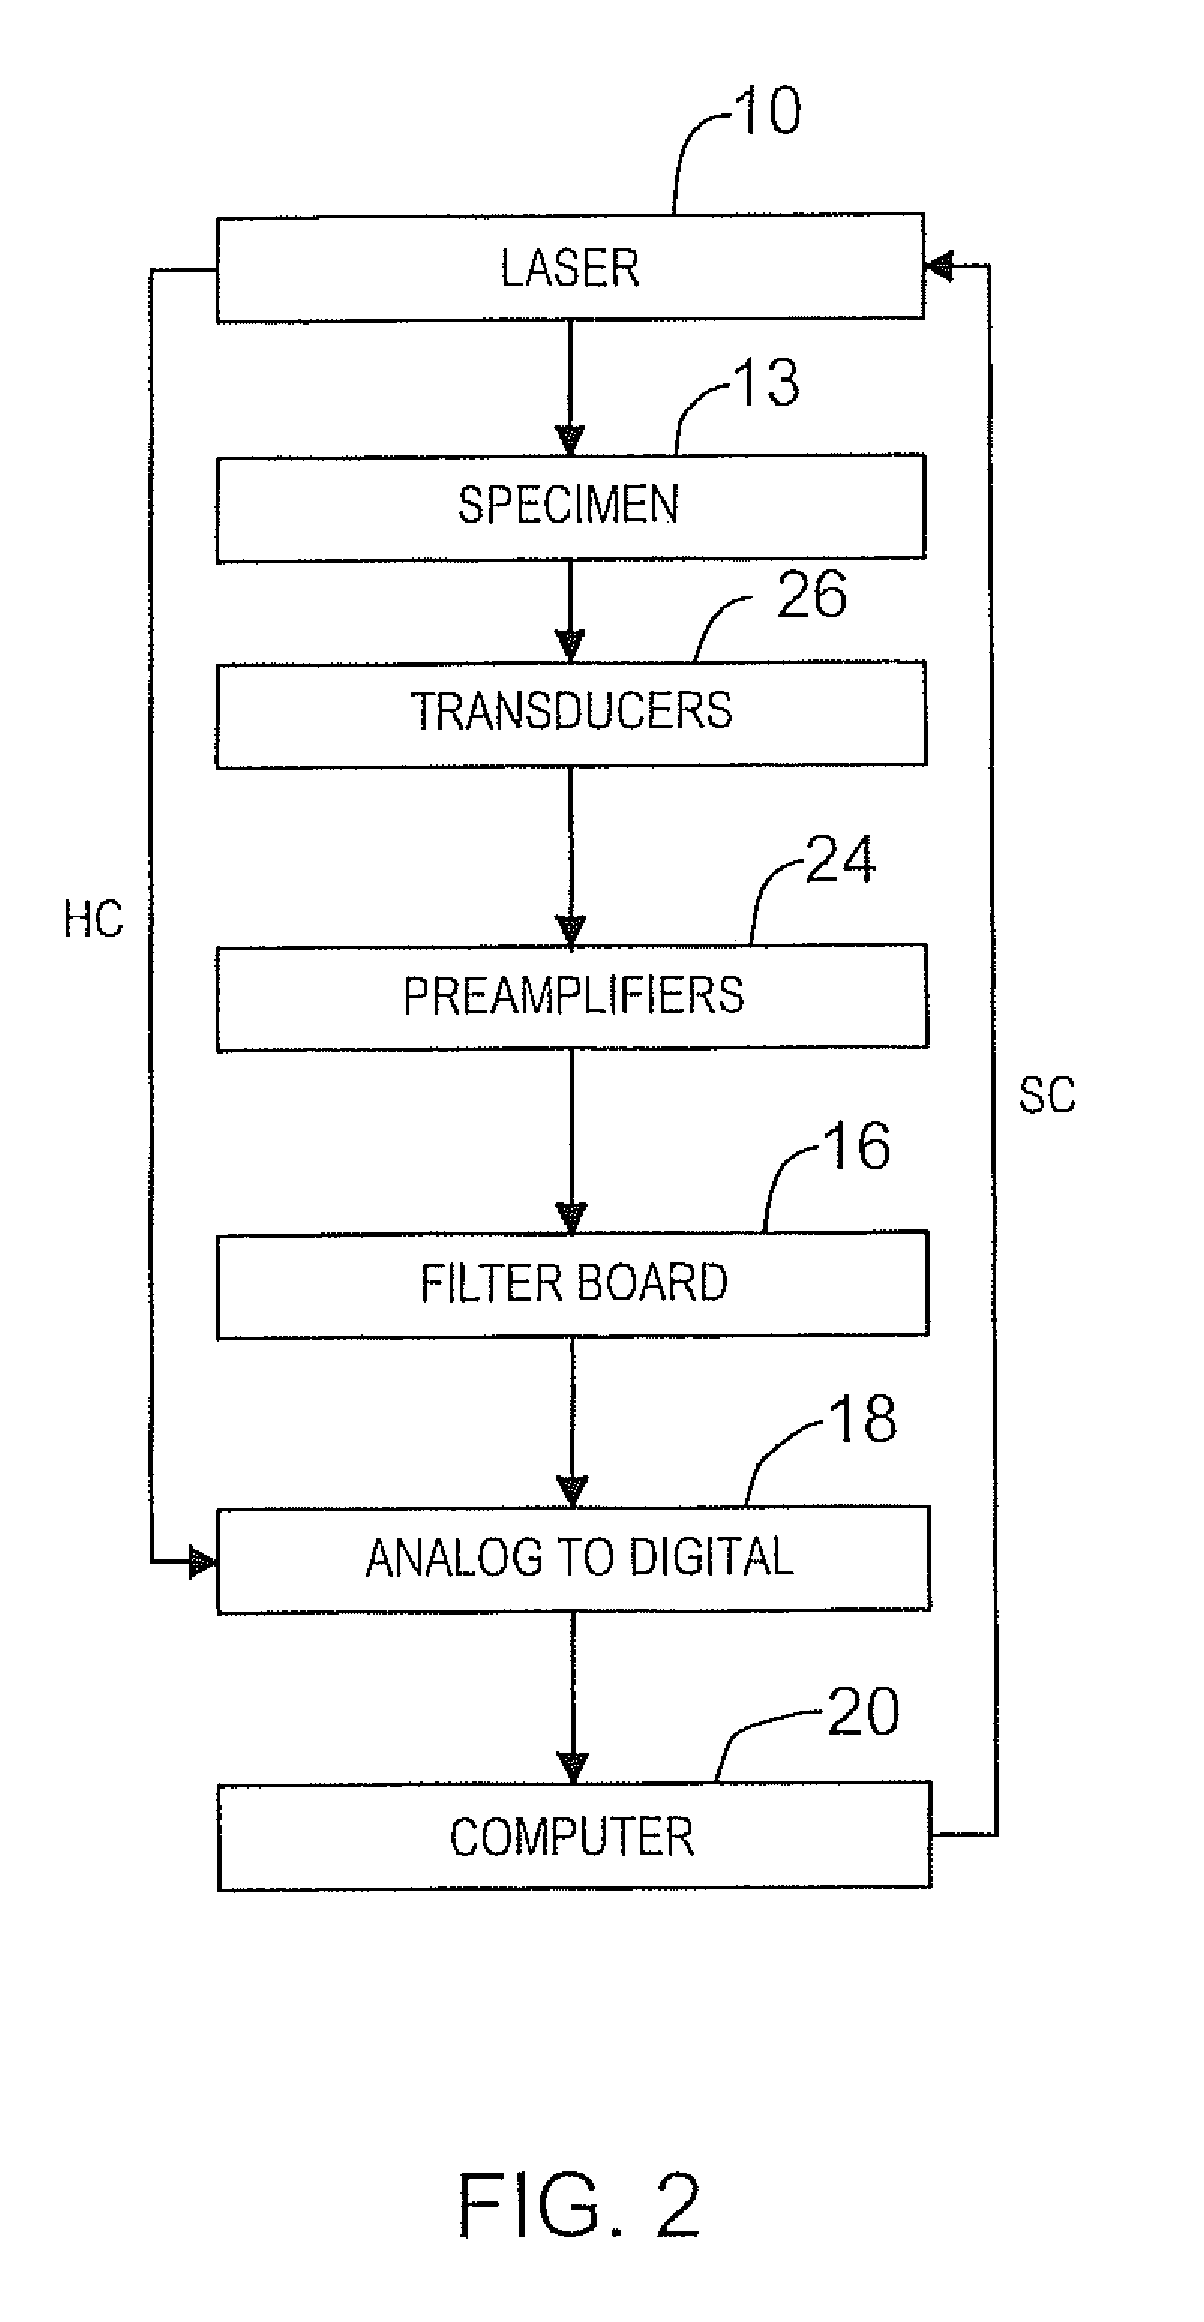 Three-dimensional staring spare array photoacoustic imager and methods for calibrating an imager